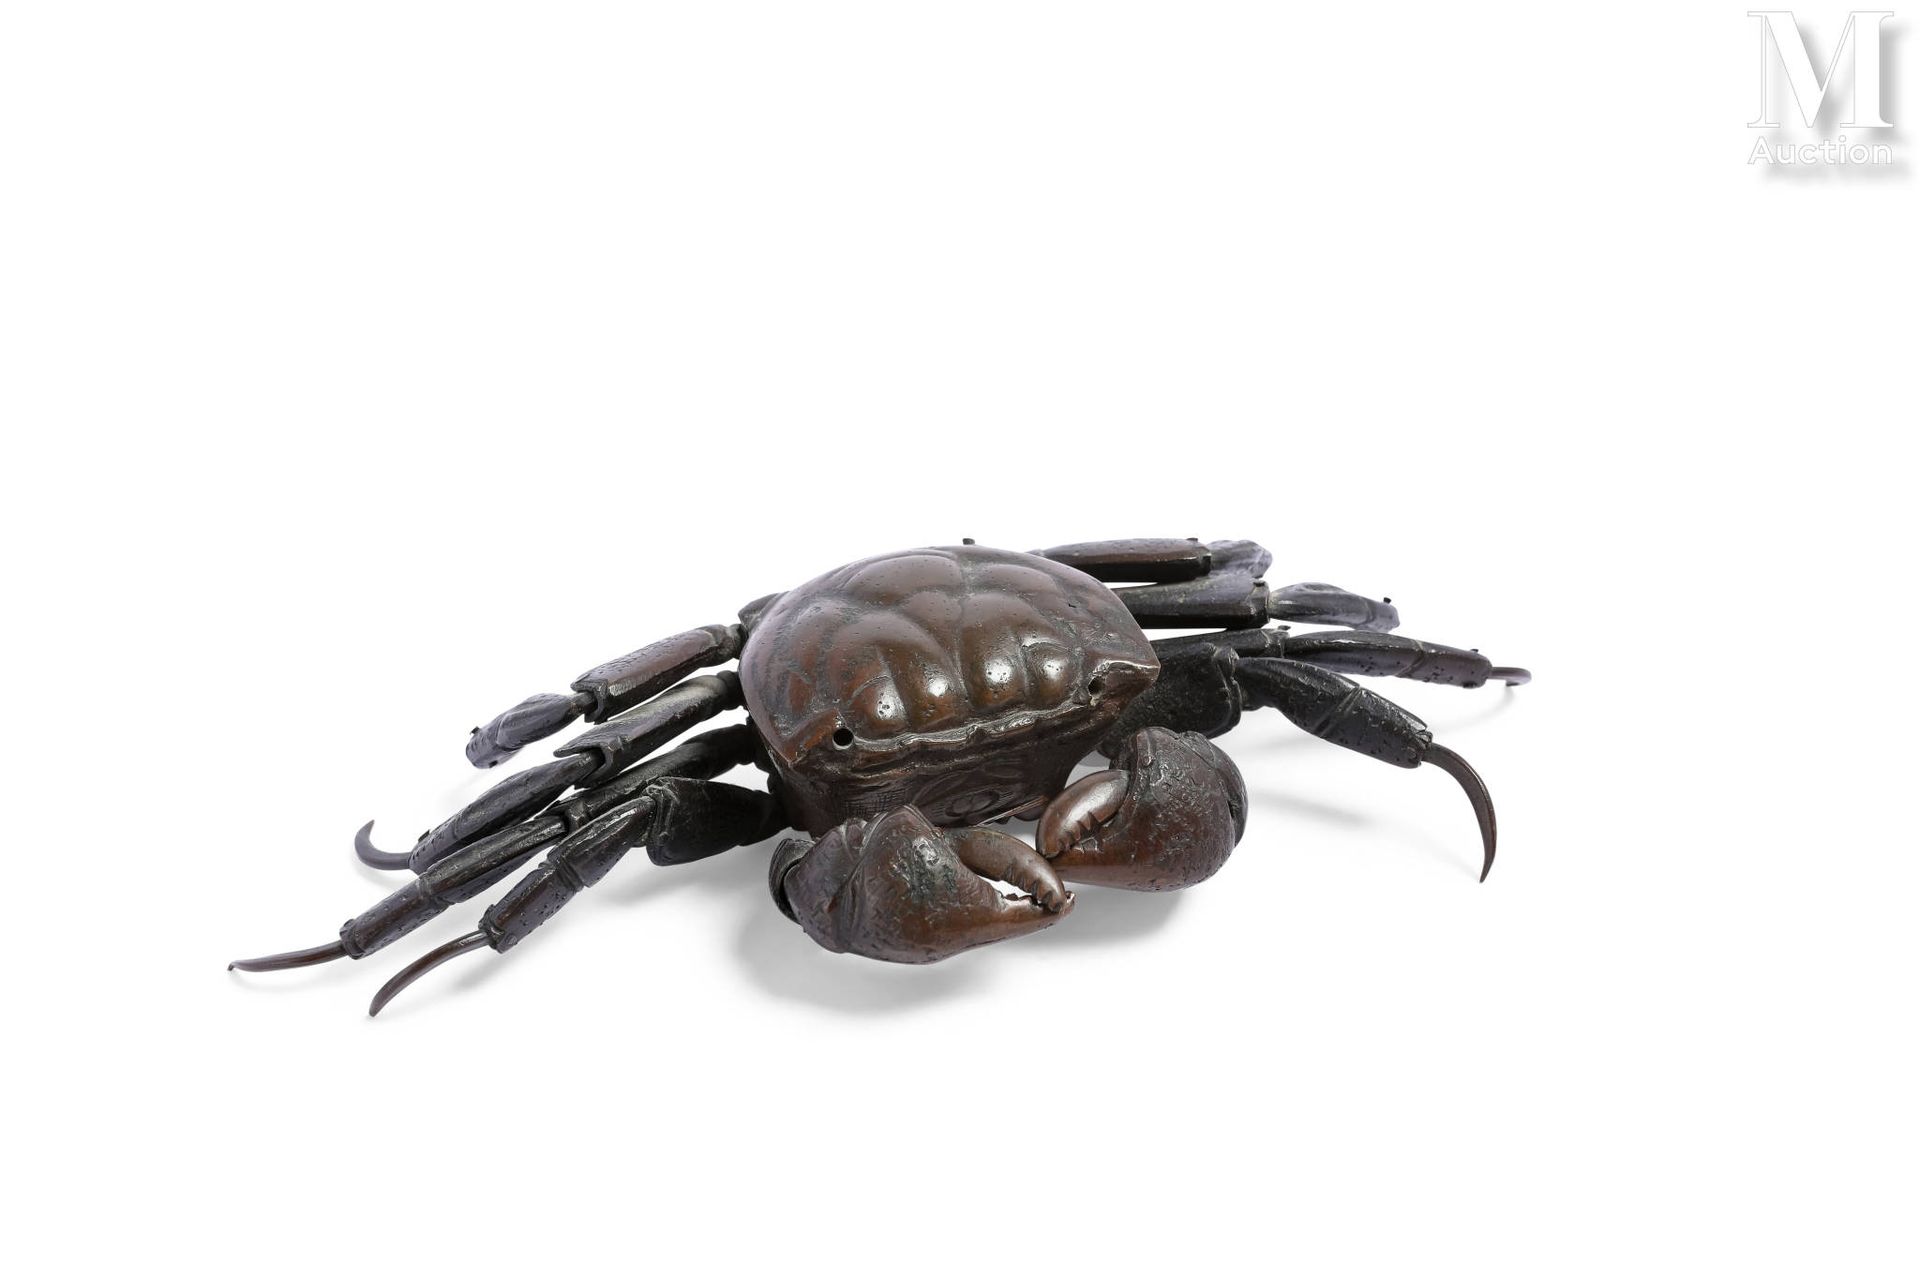 JAPON, Epoque Meiji Articulated bronze crab

jizai okimono, the claws and the le&hellip;